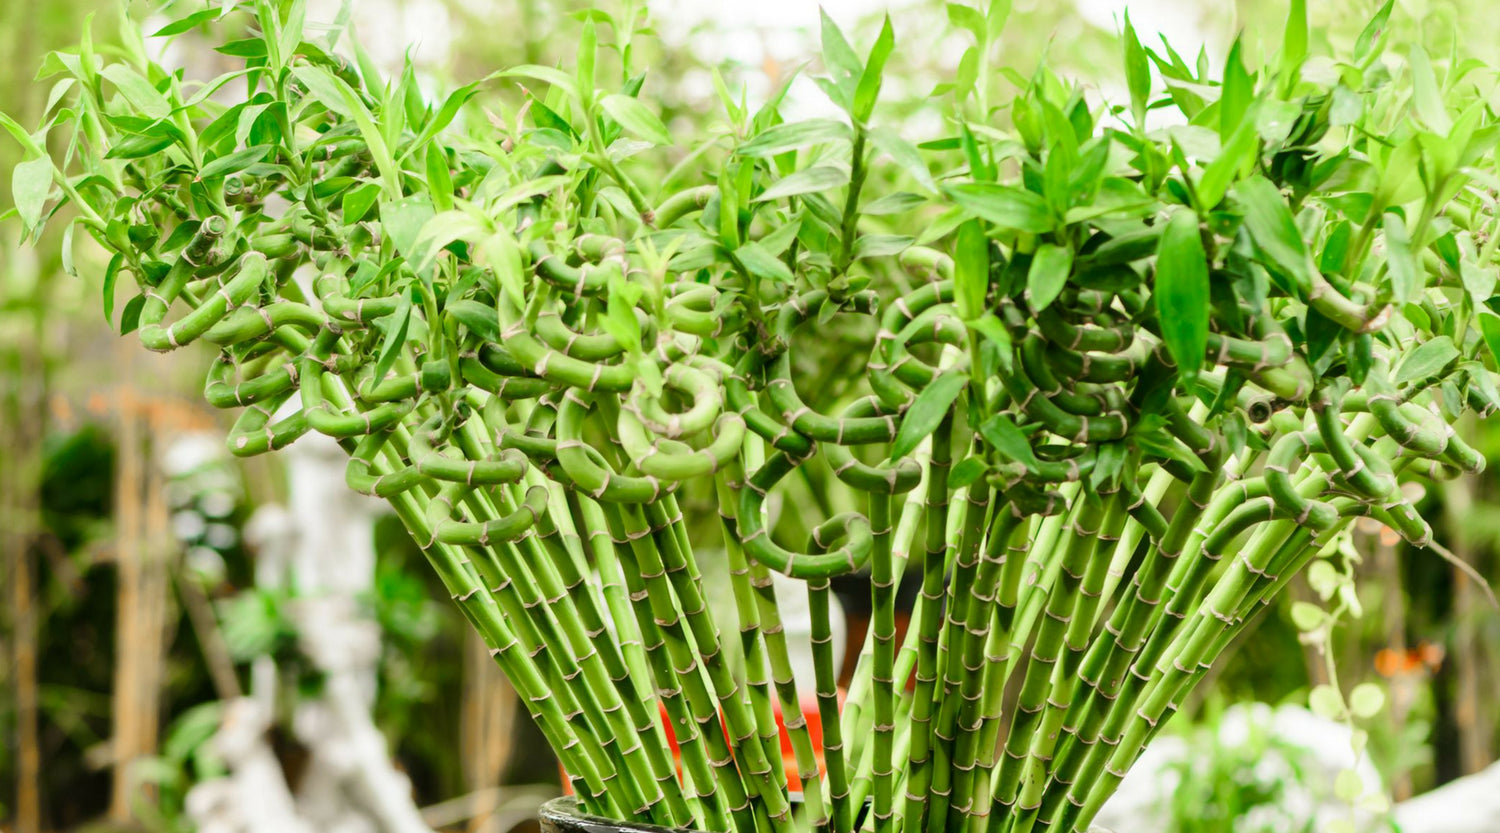 Why Do They Call It Lucky Bamboo? is It Really That Fortuitous?